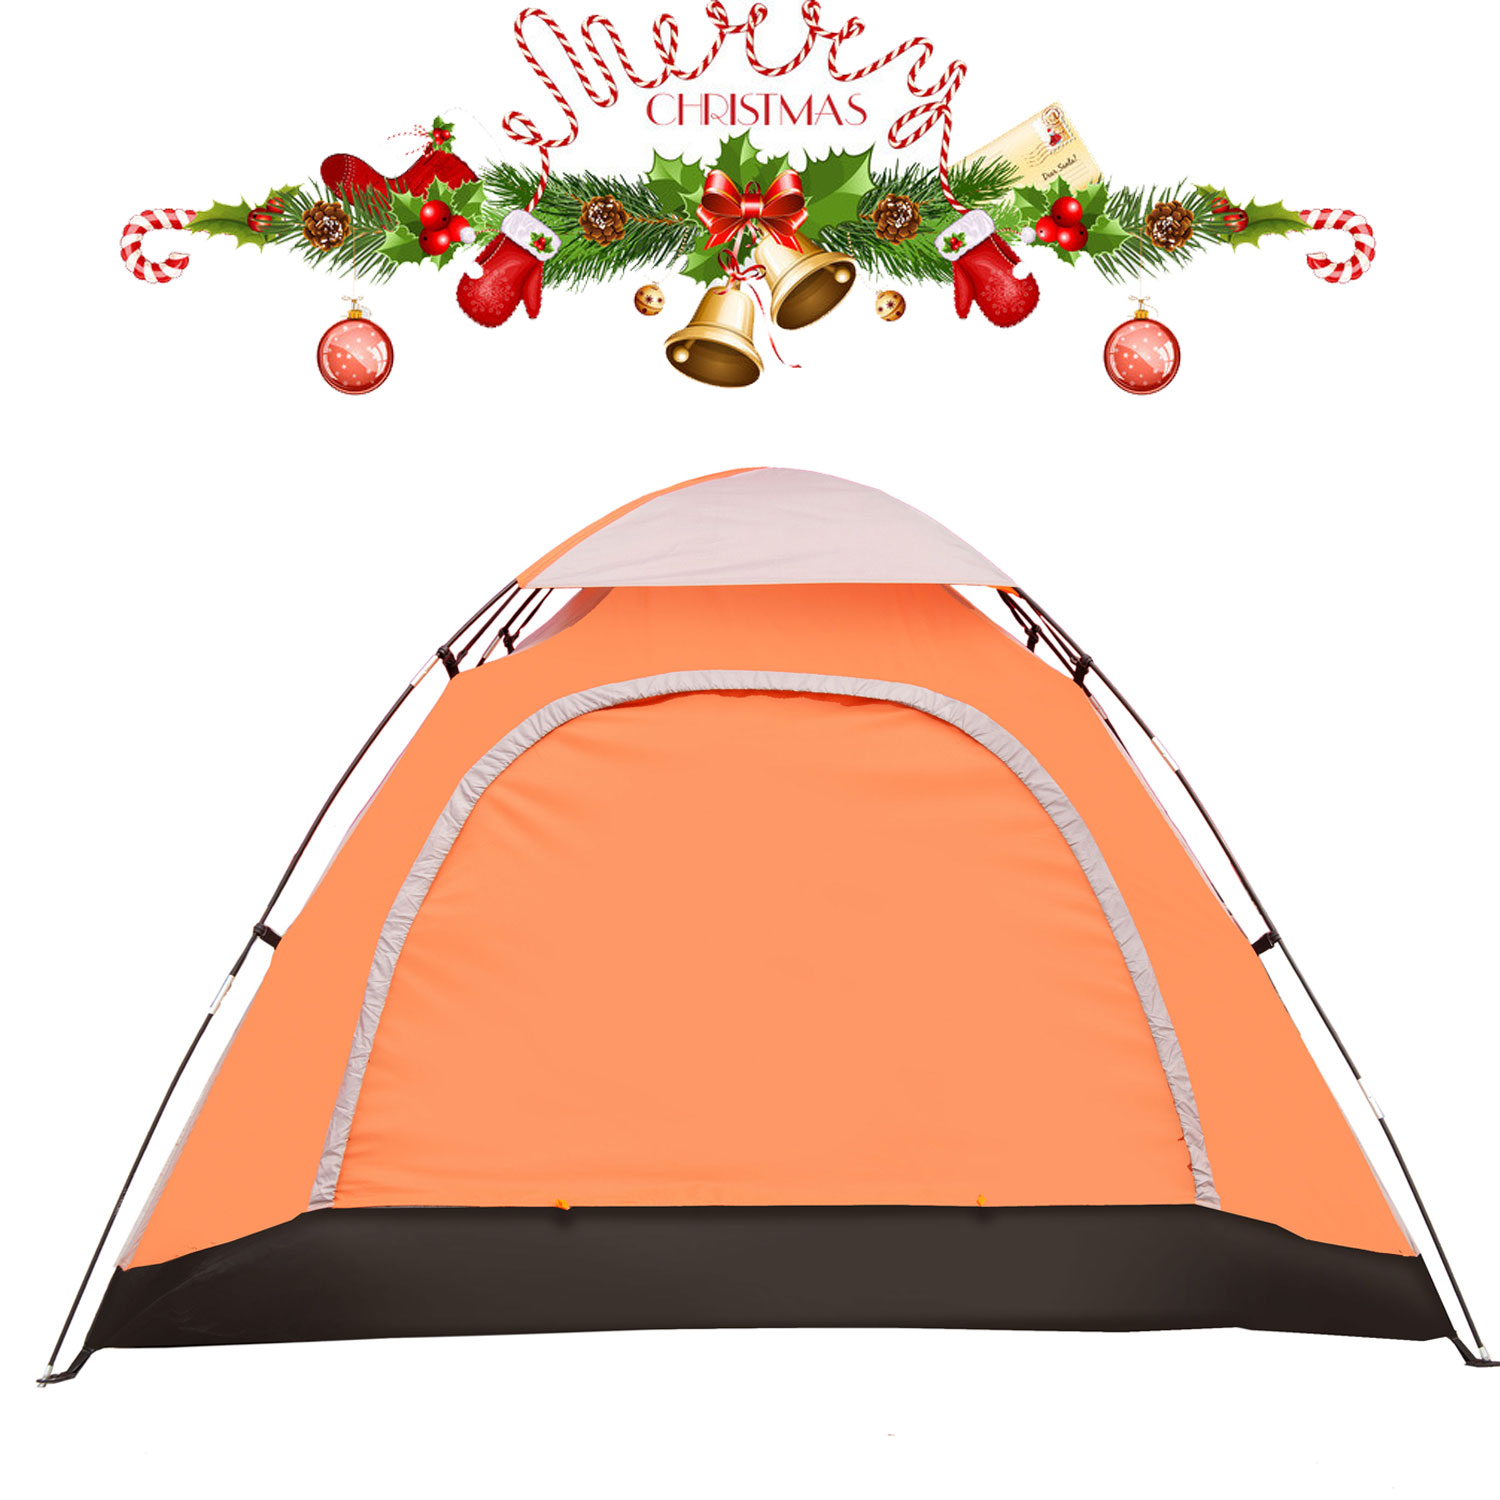 iCorer Waterproof Lightweight 2-3 Person Family Backpacking Camping Tent, 78.7" x 78.7" x 51" - image 3 of 8